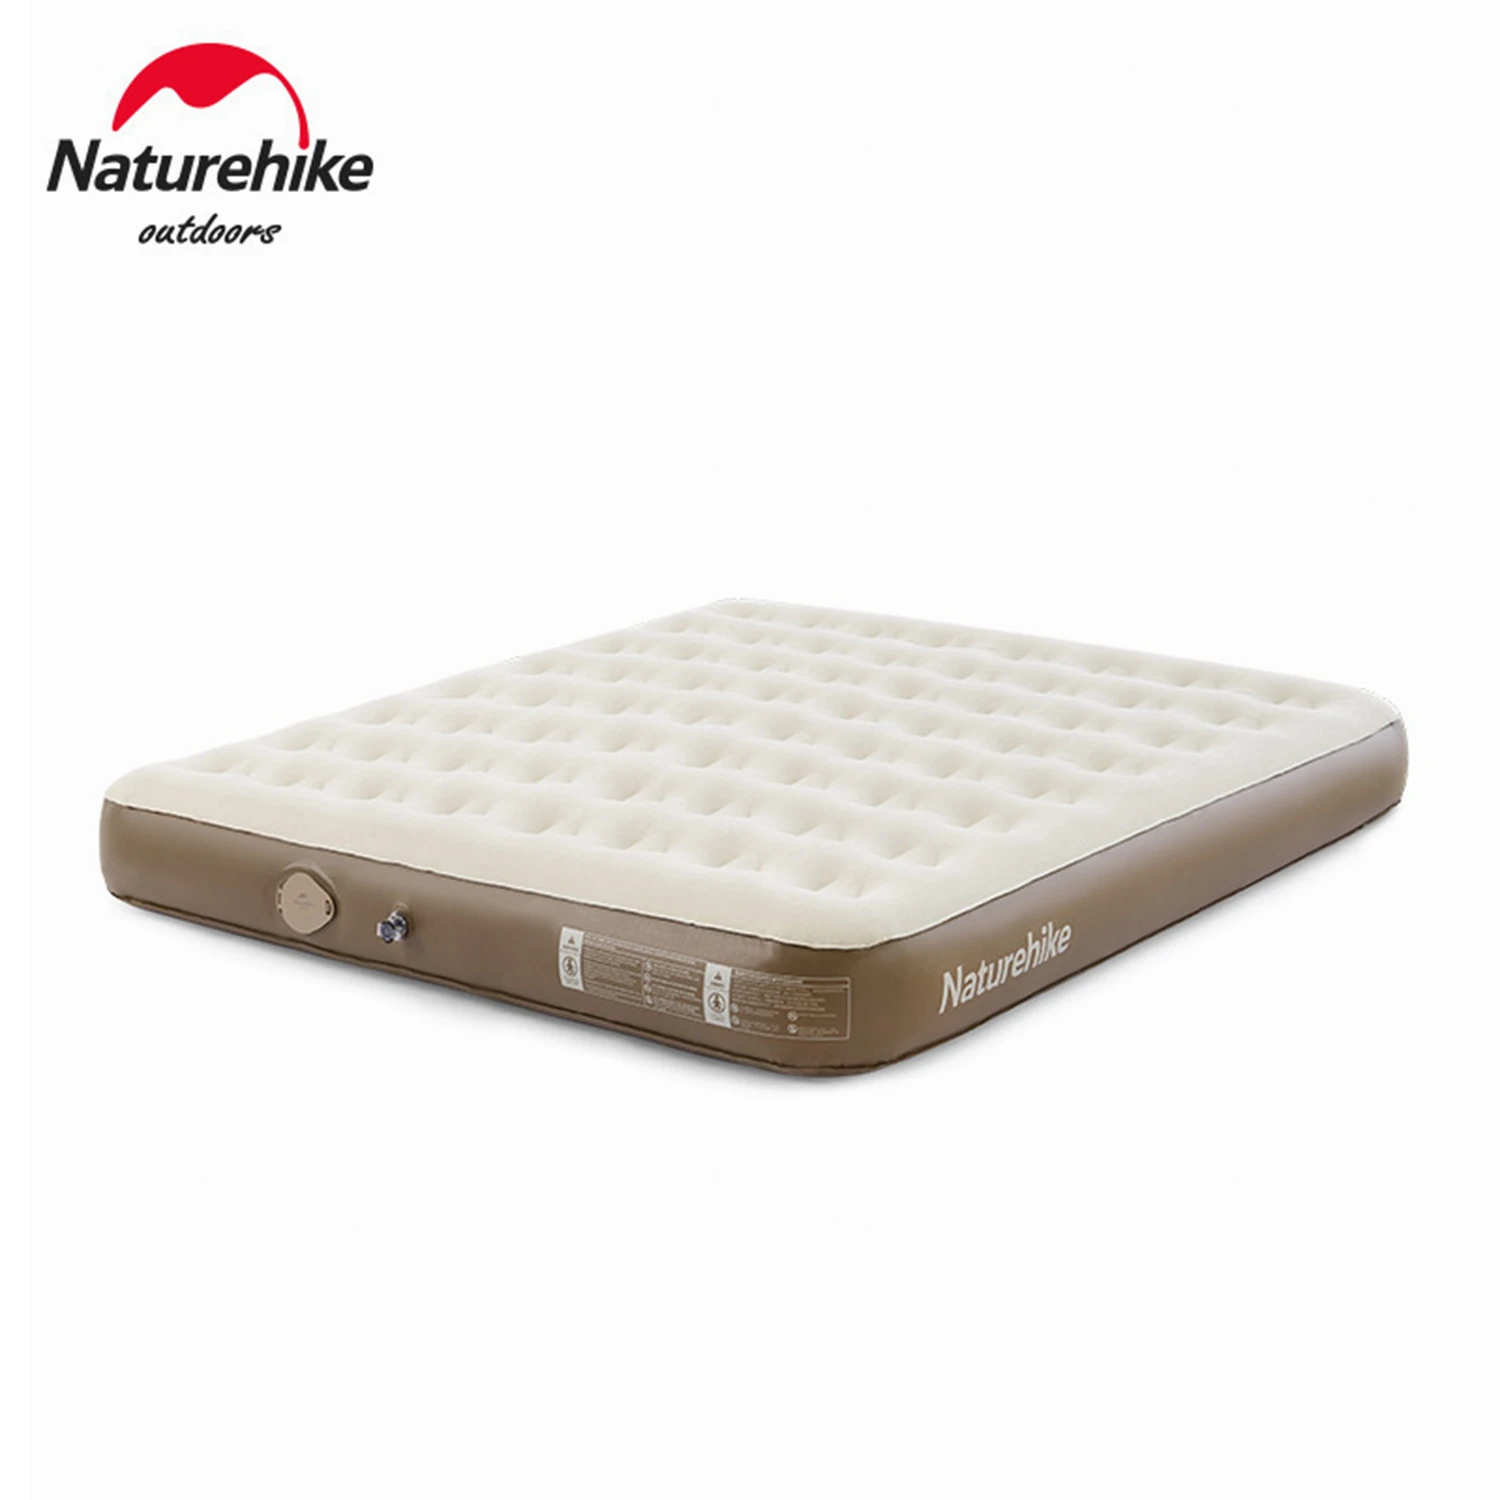 

Naturehike Quick Inflation Camping Mat 1-2 Person Heightening 25cm Pvc Inflatable Mattress With Pump Portable Sleeping Pad